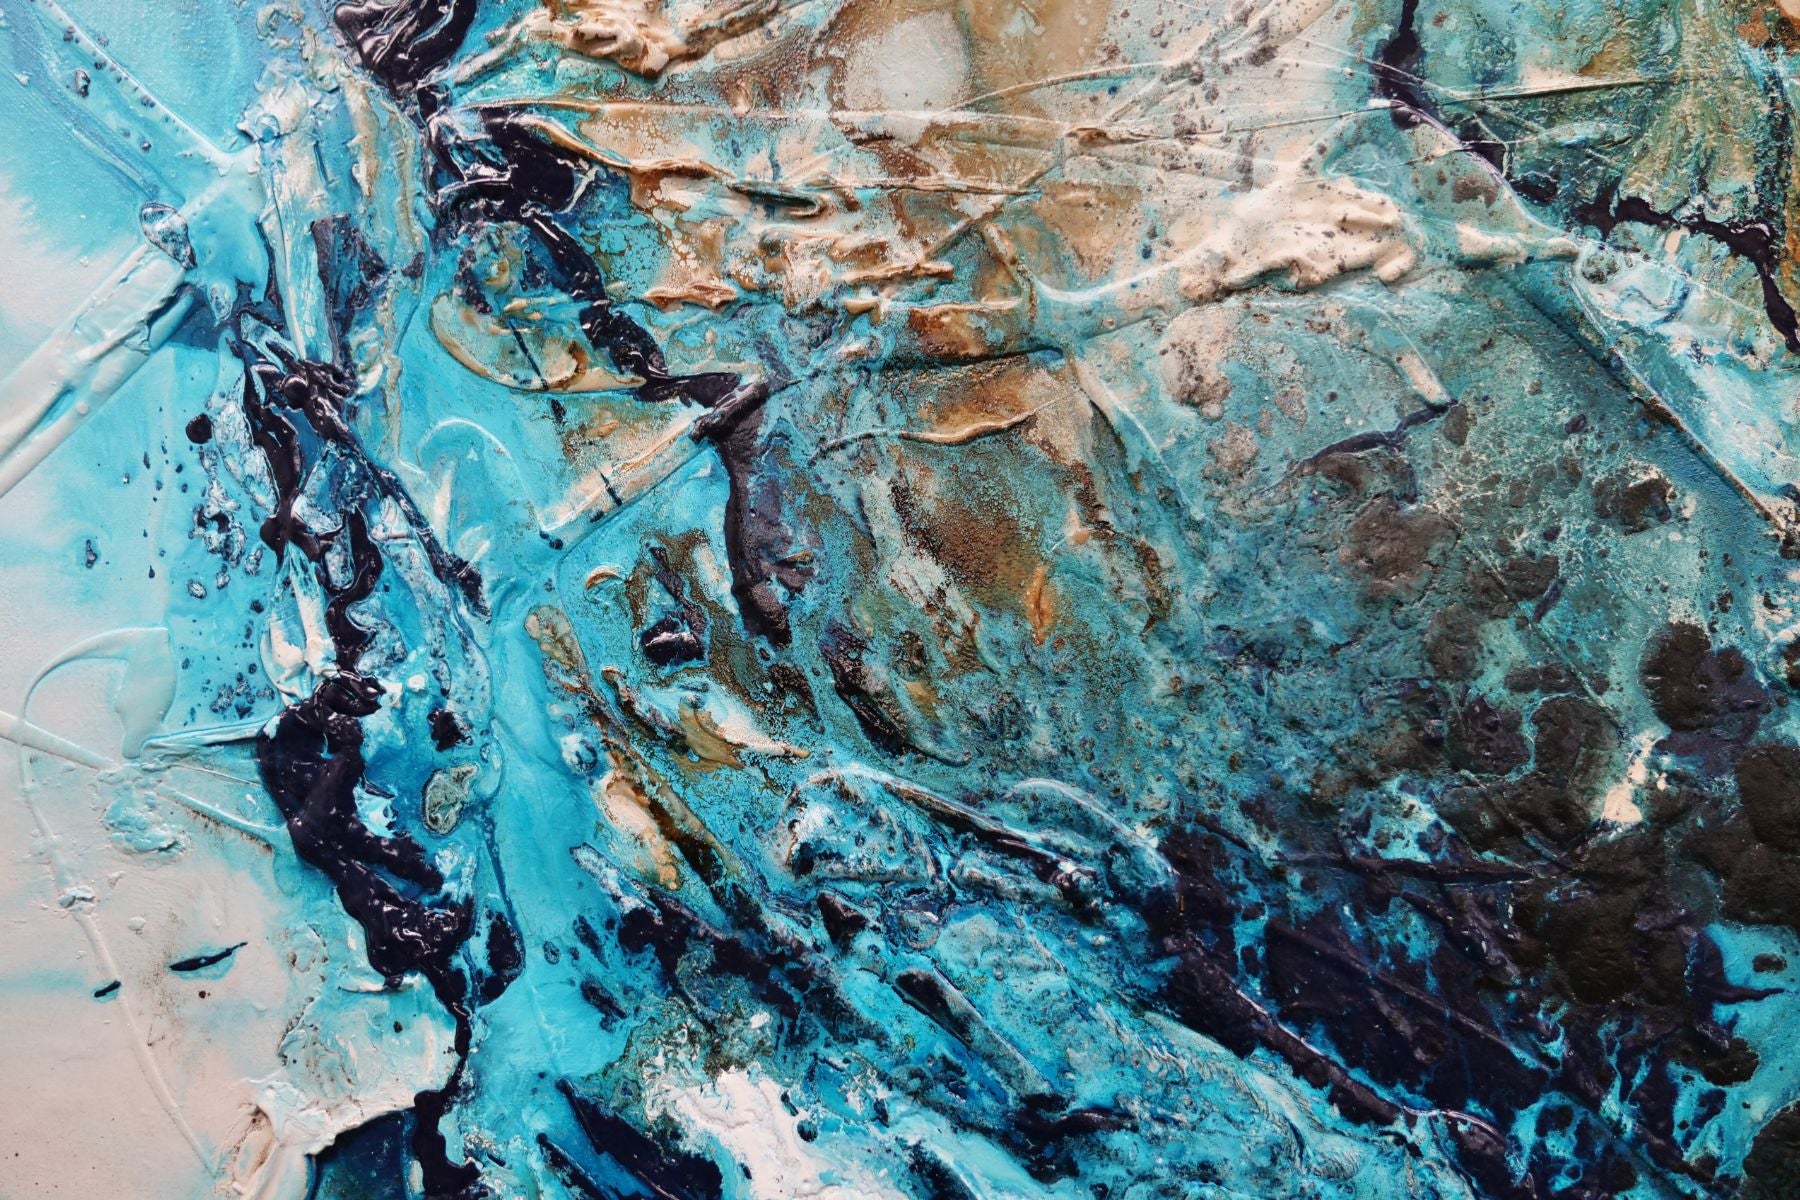 Southern and Rust 120cm x 120cm Teal Phalto White Textured Abstract Painting (SOLD)